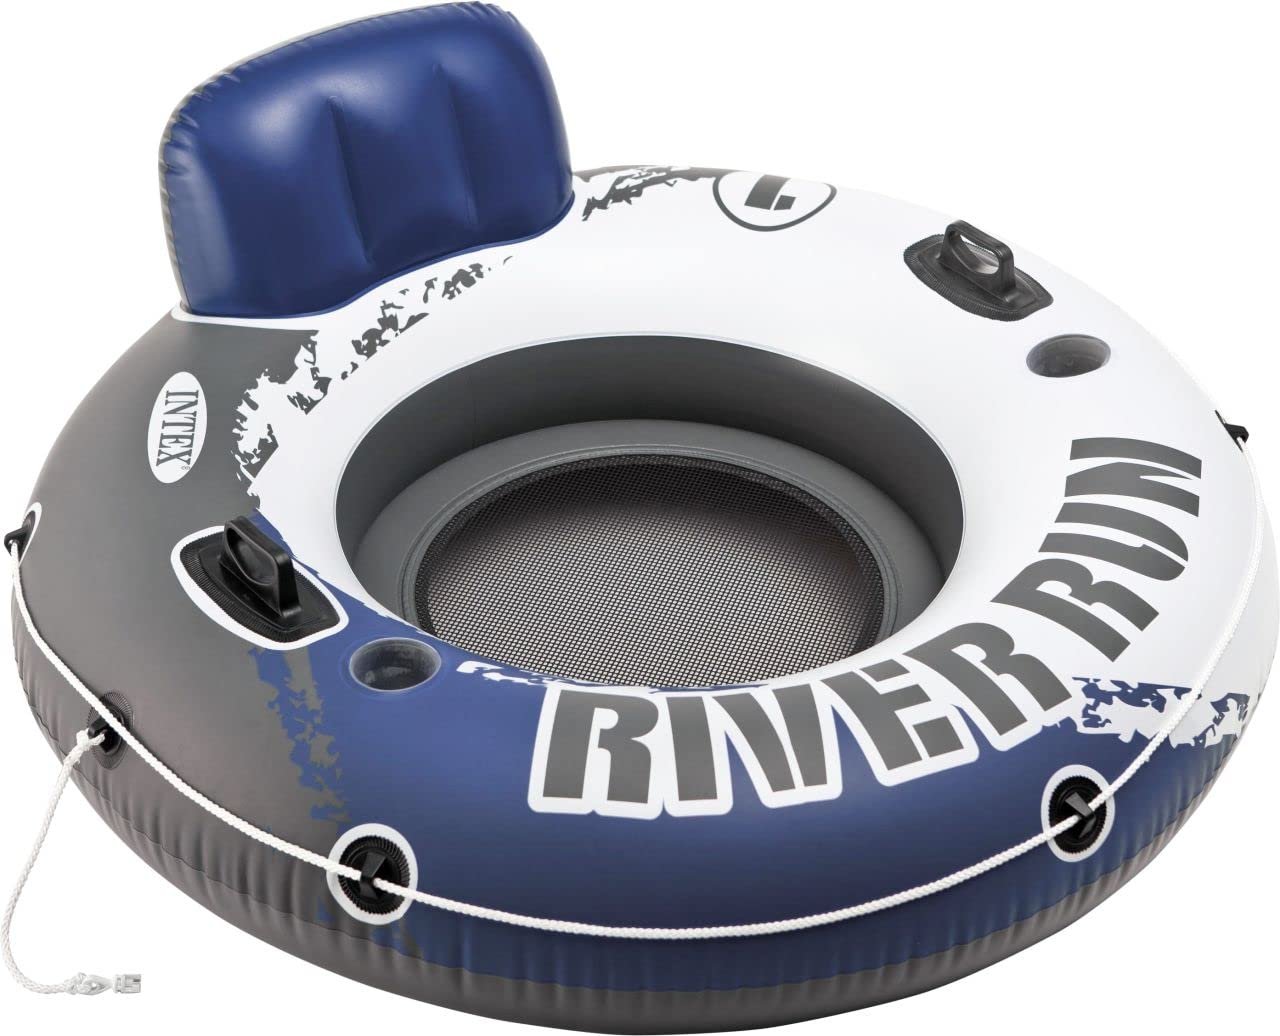 River Run Giant Inflatable Buoy - Intex Blue